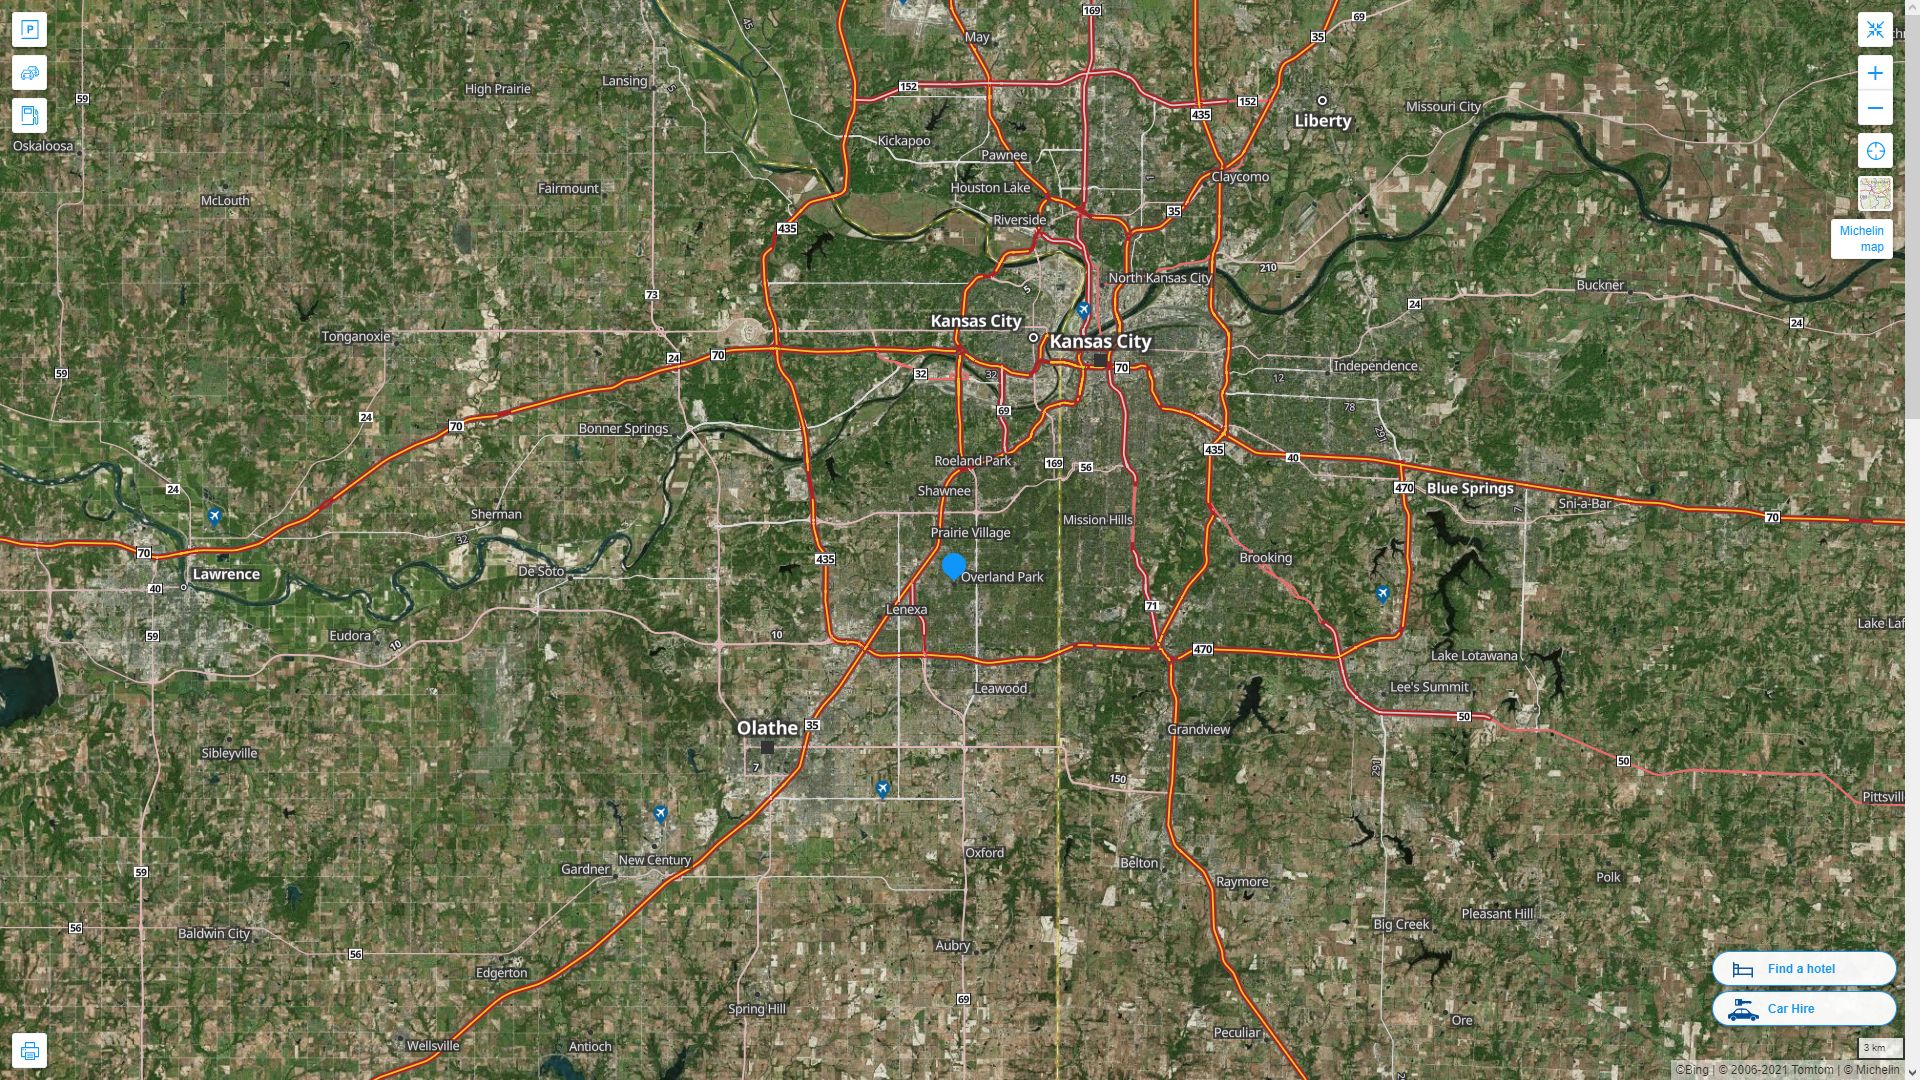 Overland Park Kansas Highway and Road Map with Satellite View